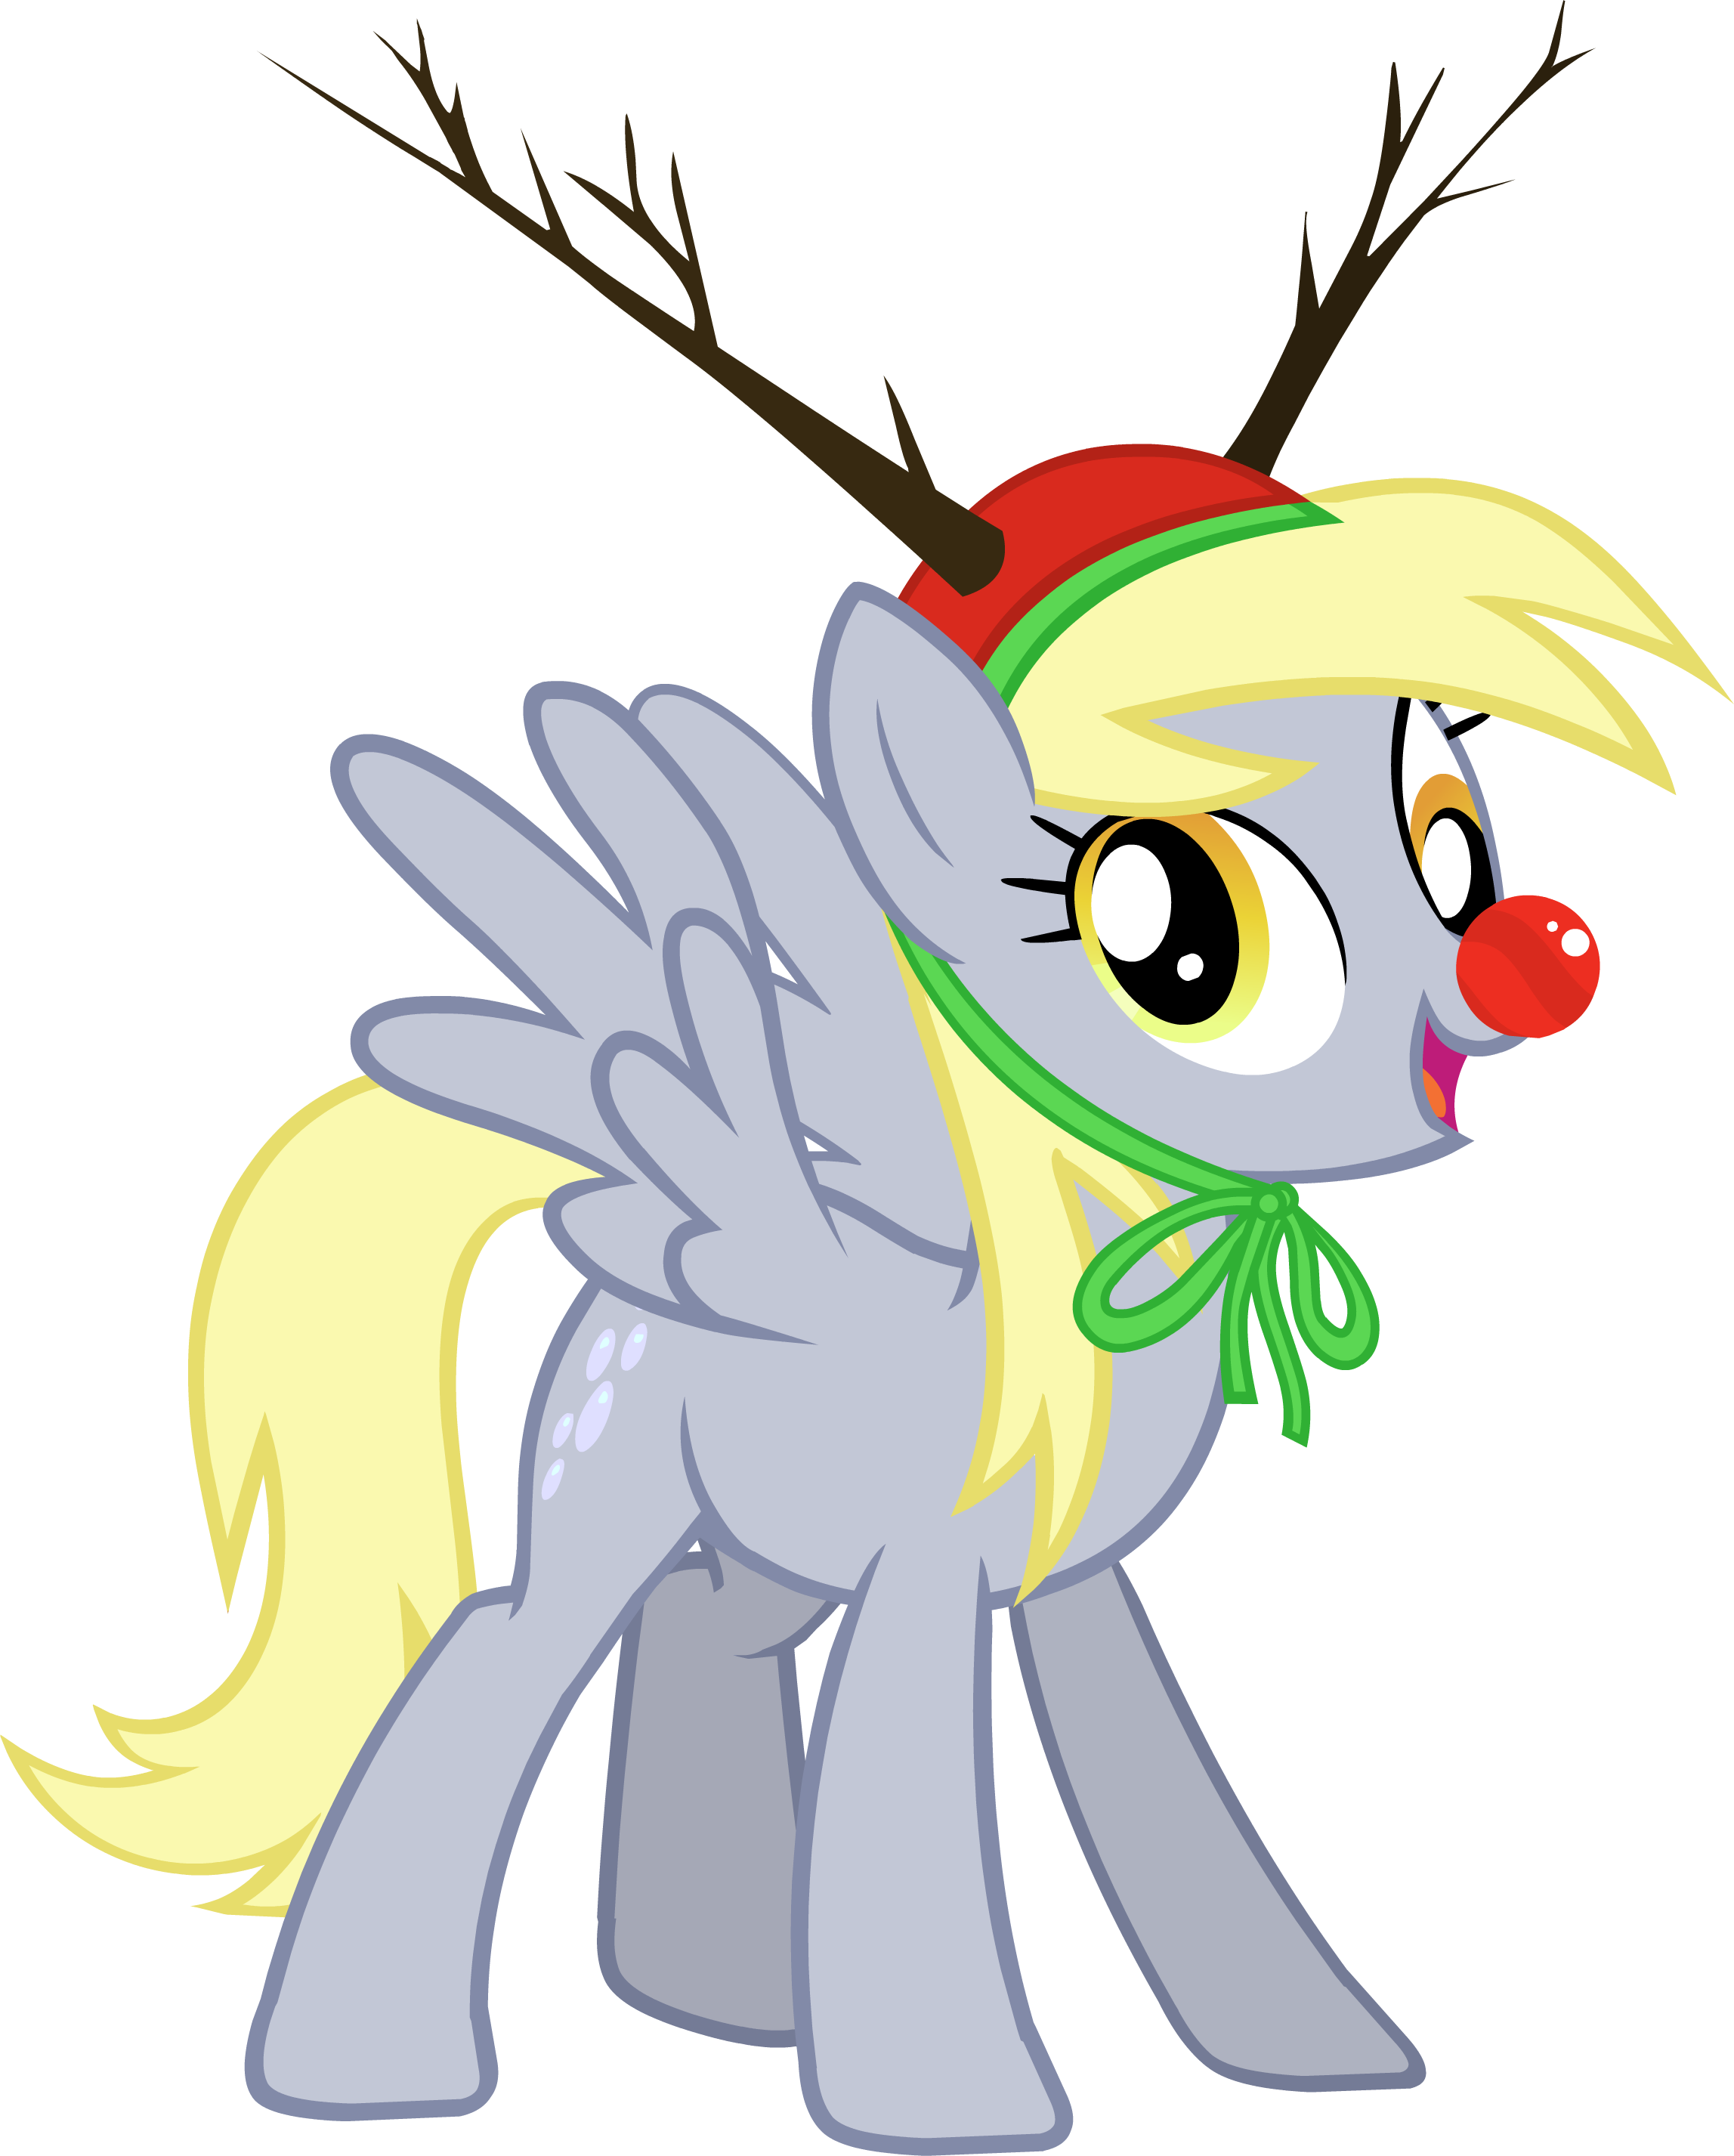 [Bild: Derpy_Hooves_Hearth%27s_Warming_Eve_Card_Creator.png]